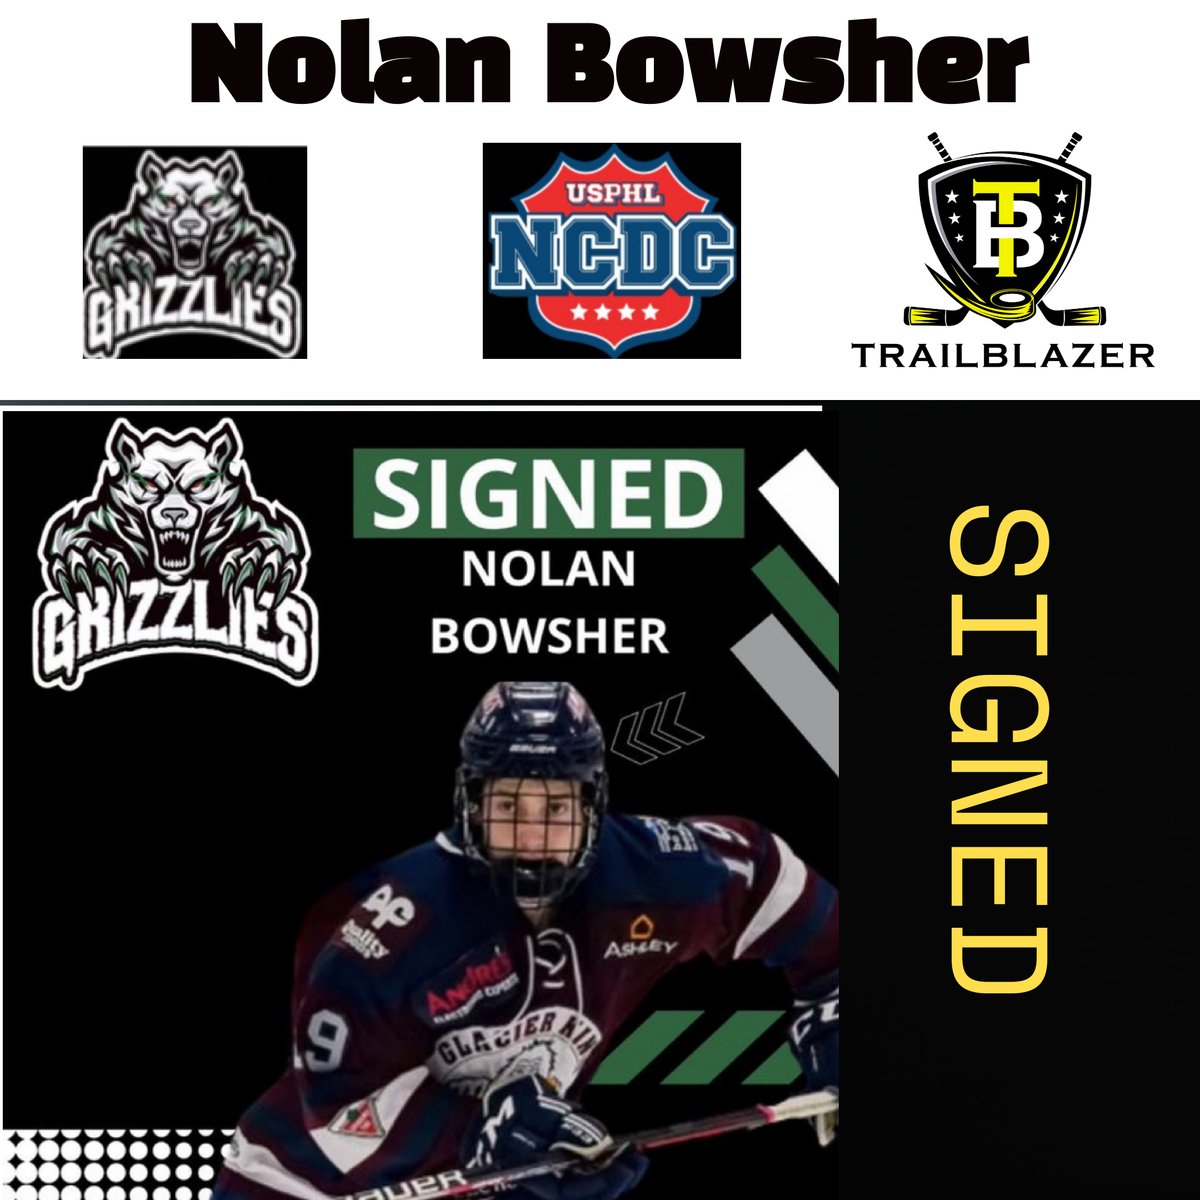 SIGNING ALERT:
Congrats to 2004 F NOLAN BOWSHER of Langley, BC on signing with @RSGrizzlies of @USPHL  National Collegiate Development Conference (NCDC)! Nolan played with the @KIJHL  @CVGKhockey !
#trailblazer